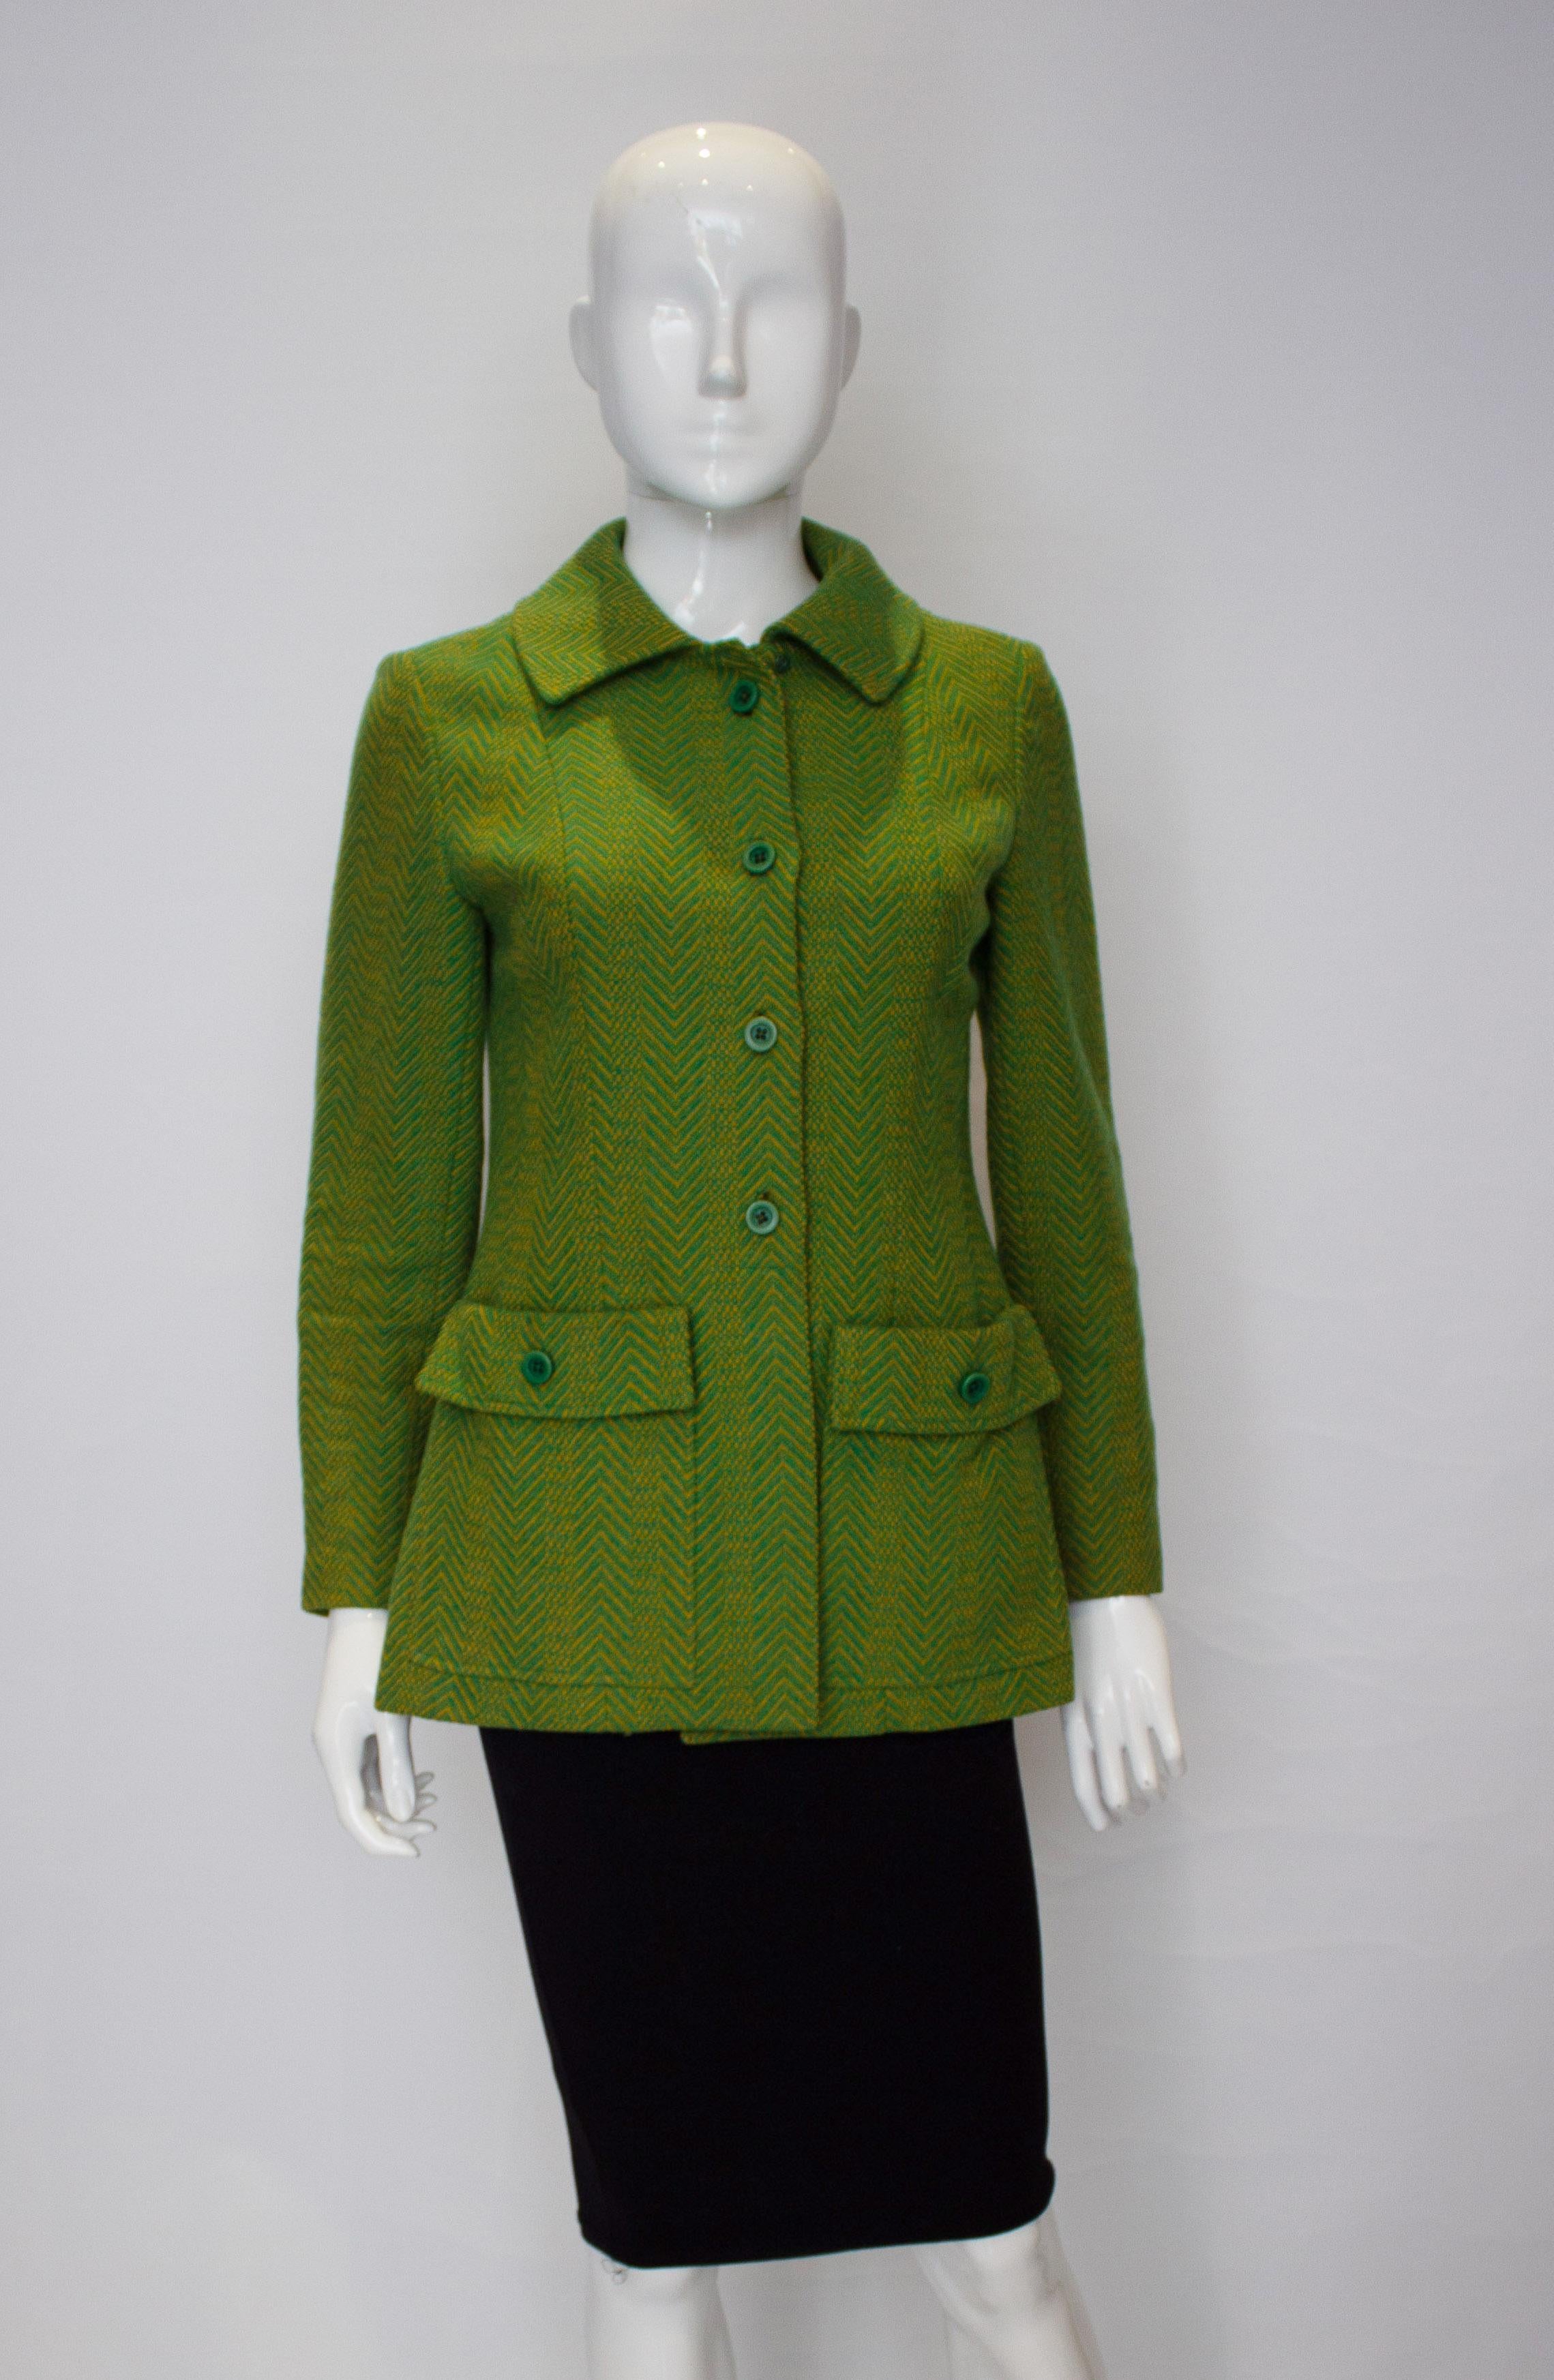 Women's Vintage Yellow /Green Jacket by Marcus Boutique